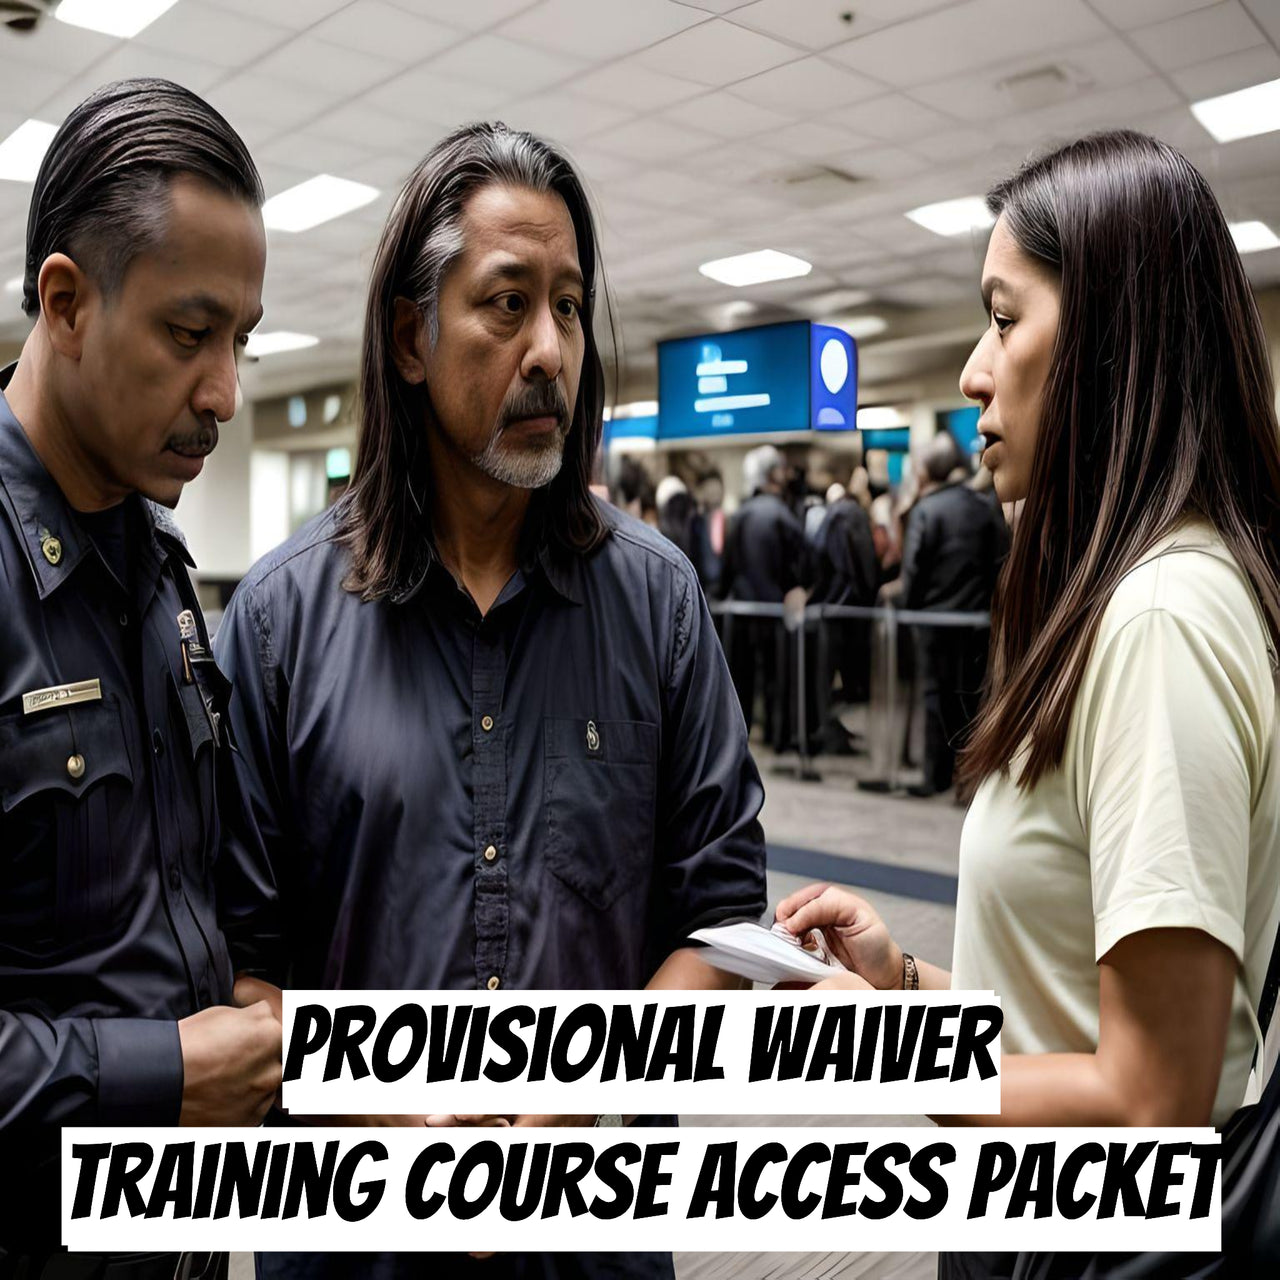 Provisional Waiver Training Course Access Packet